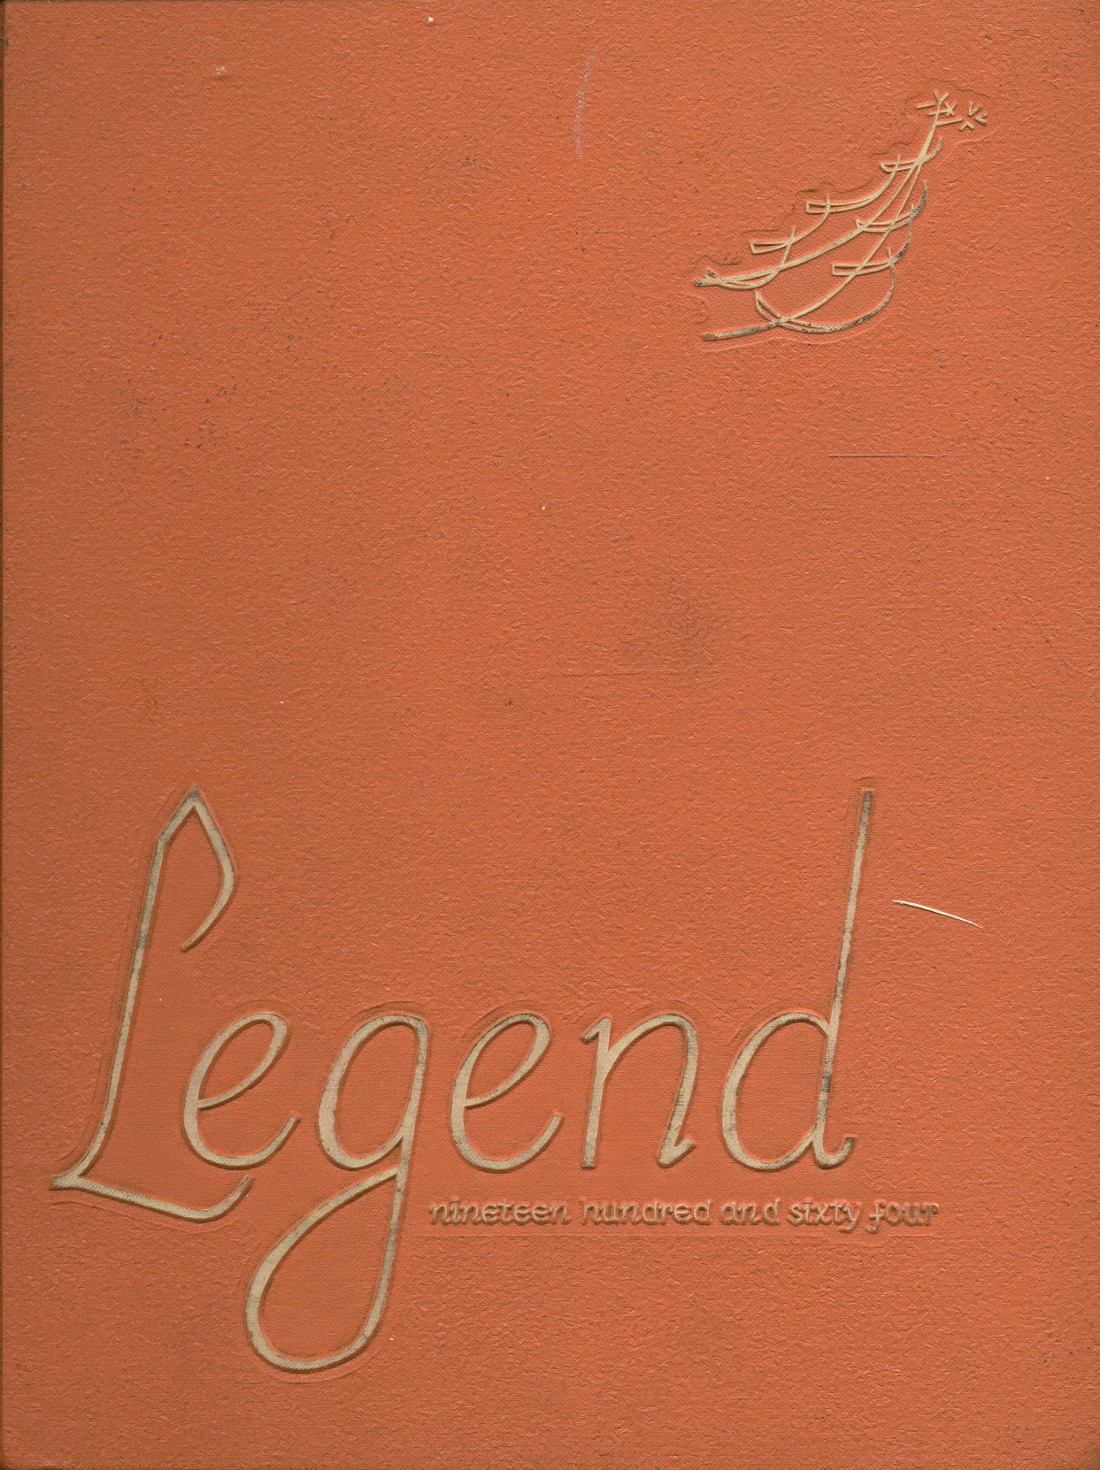 1964-yearbook-from-cleveland-high-school-from-portland-oregon-for-sale